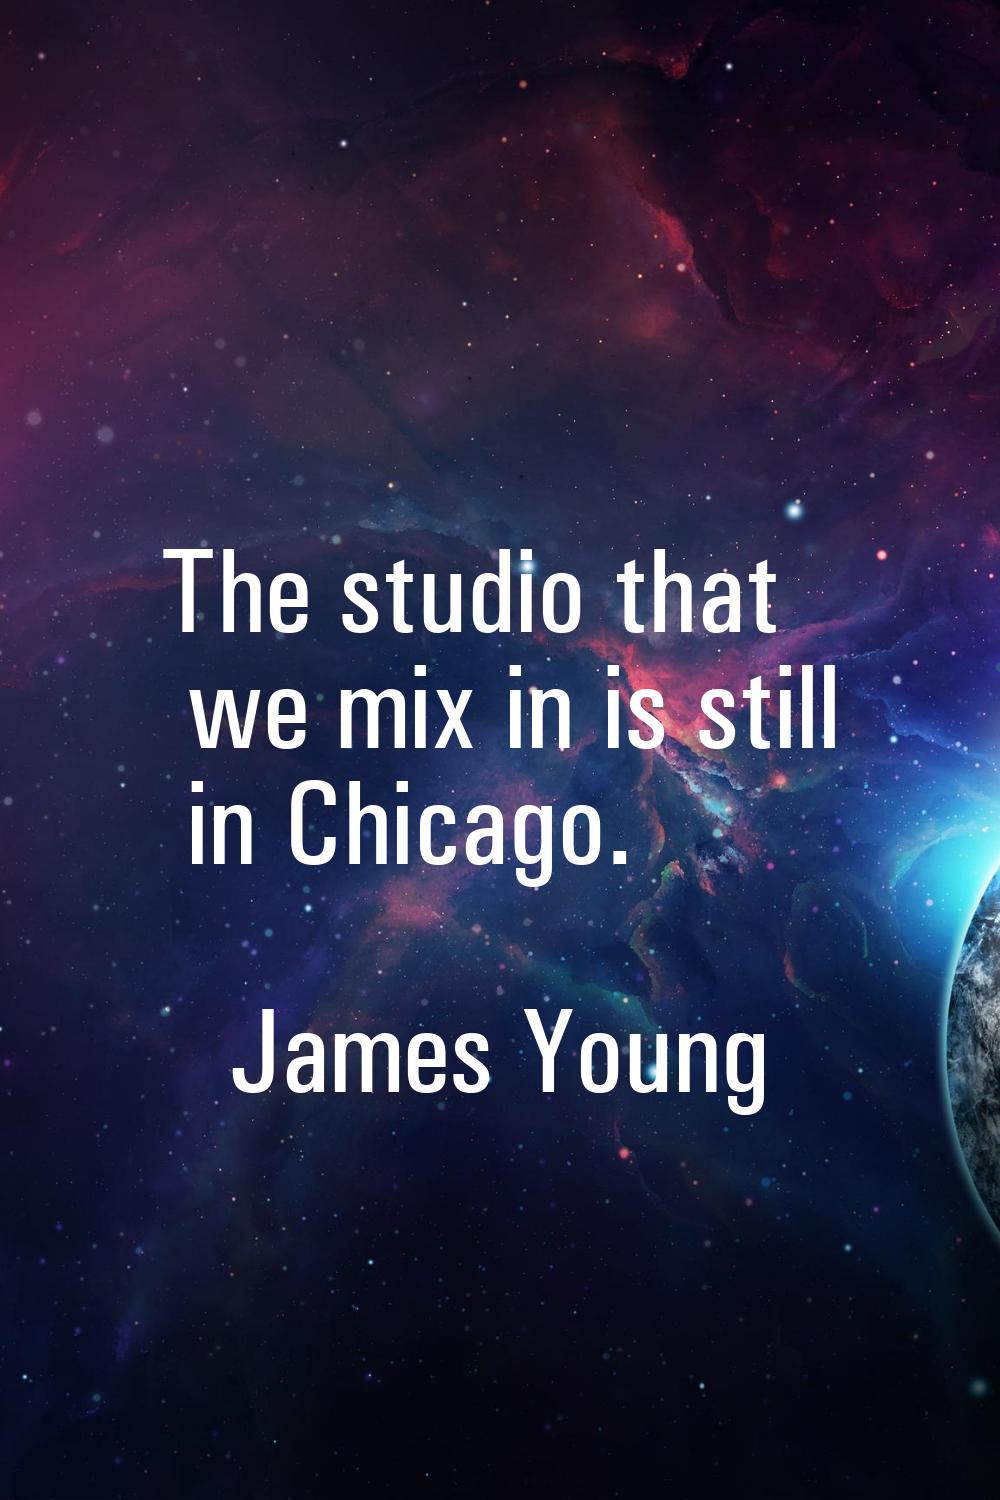 The studio that we mix in is still in Chicago.